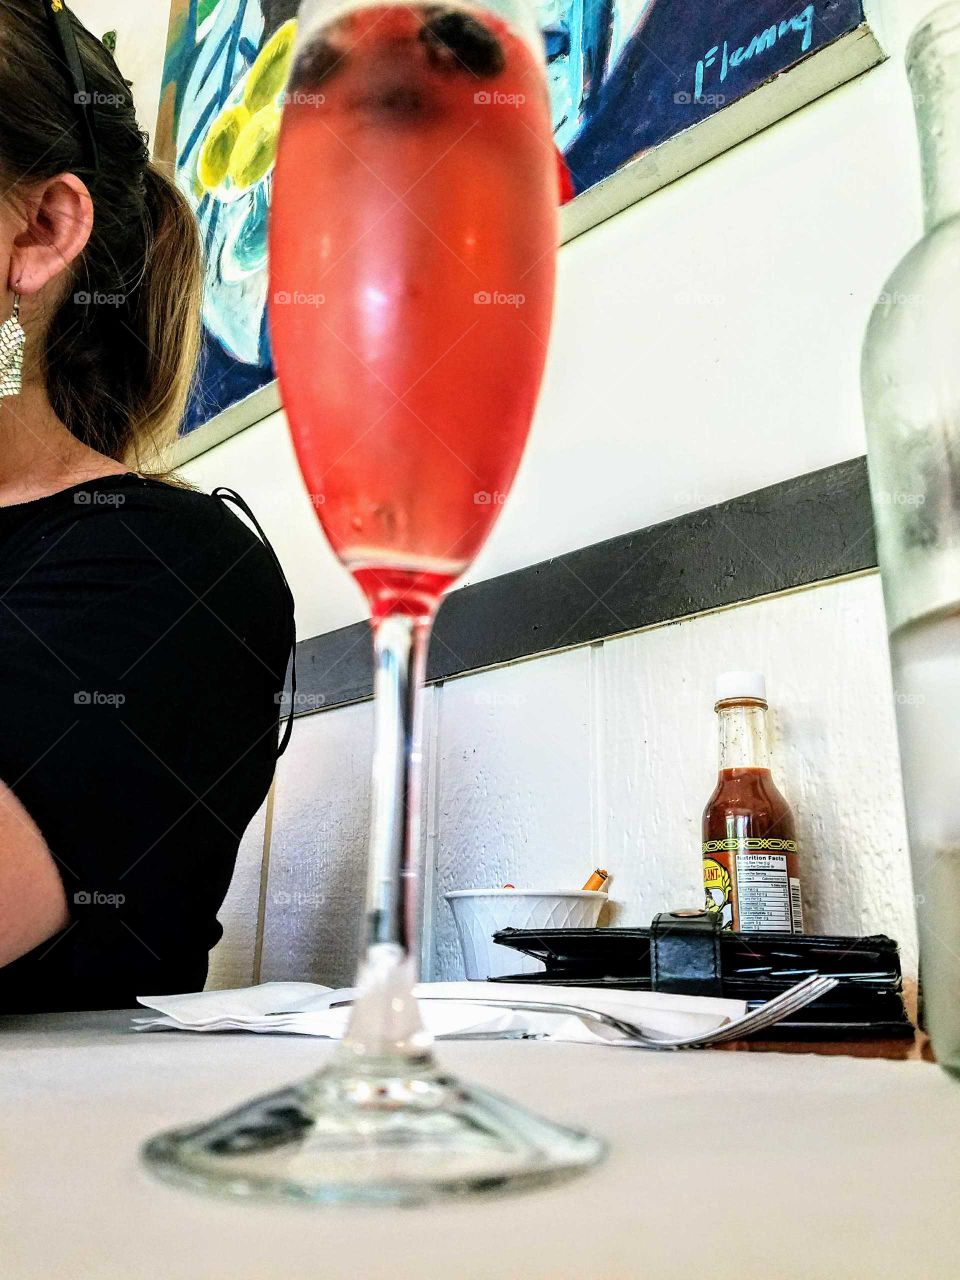 A Tall Glass of Pomagranite Mimosa on a hot Summer Day